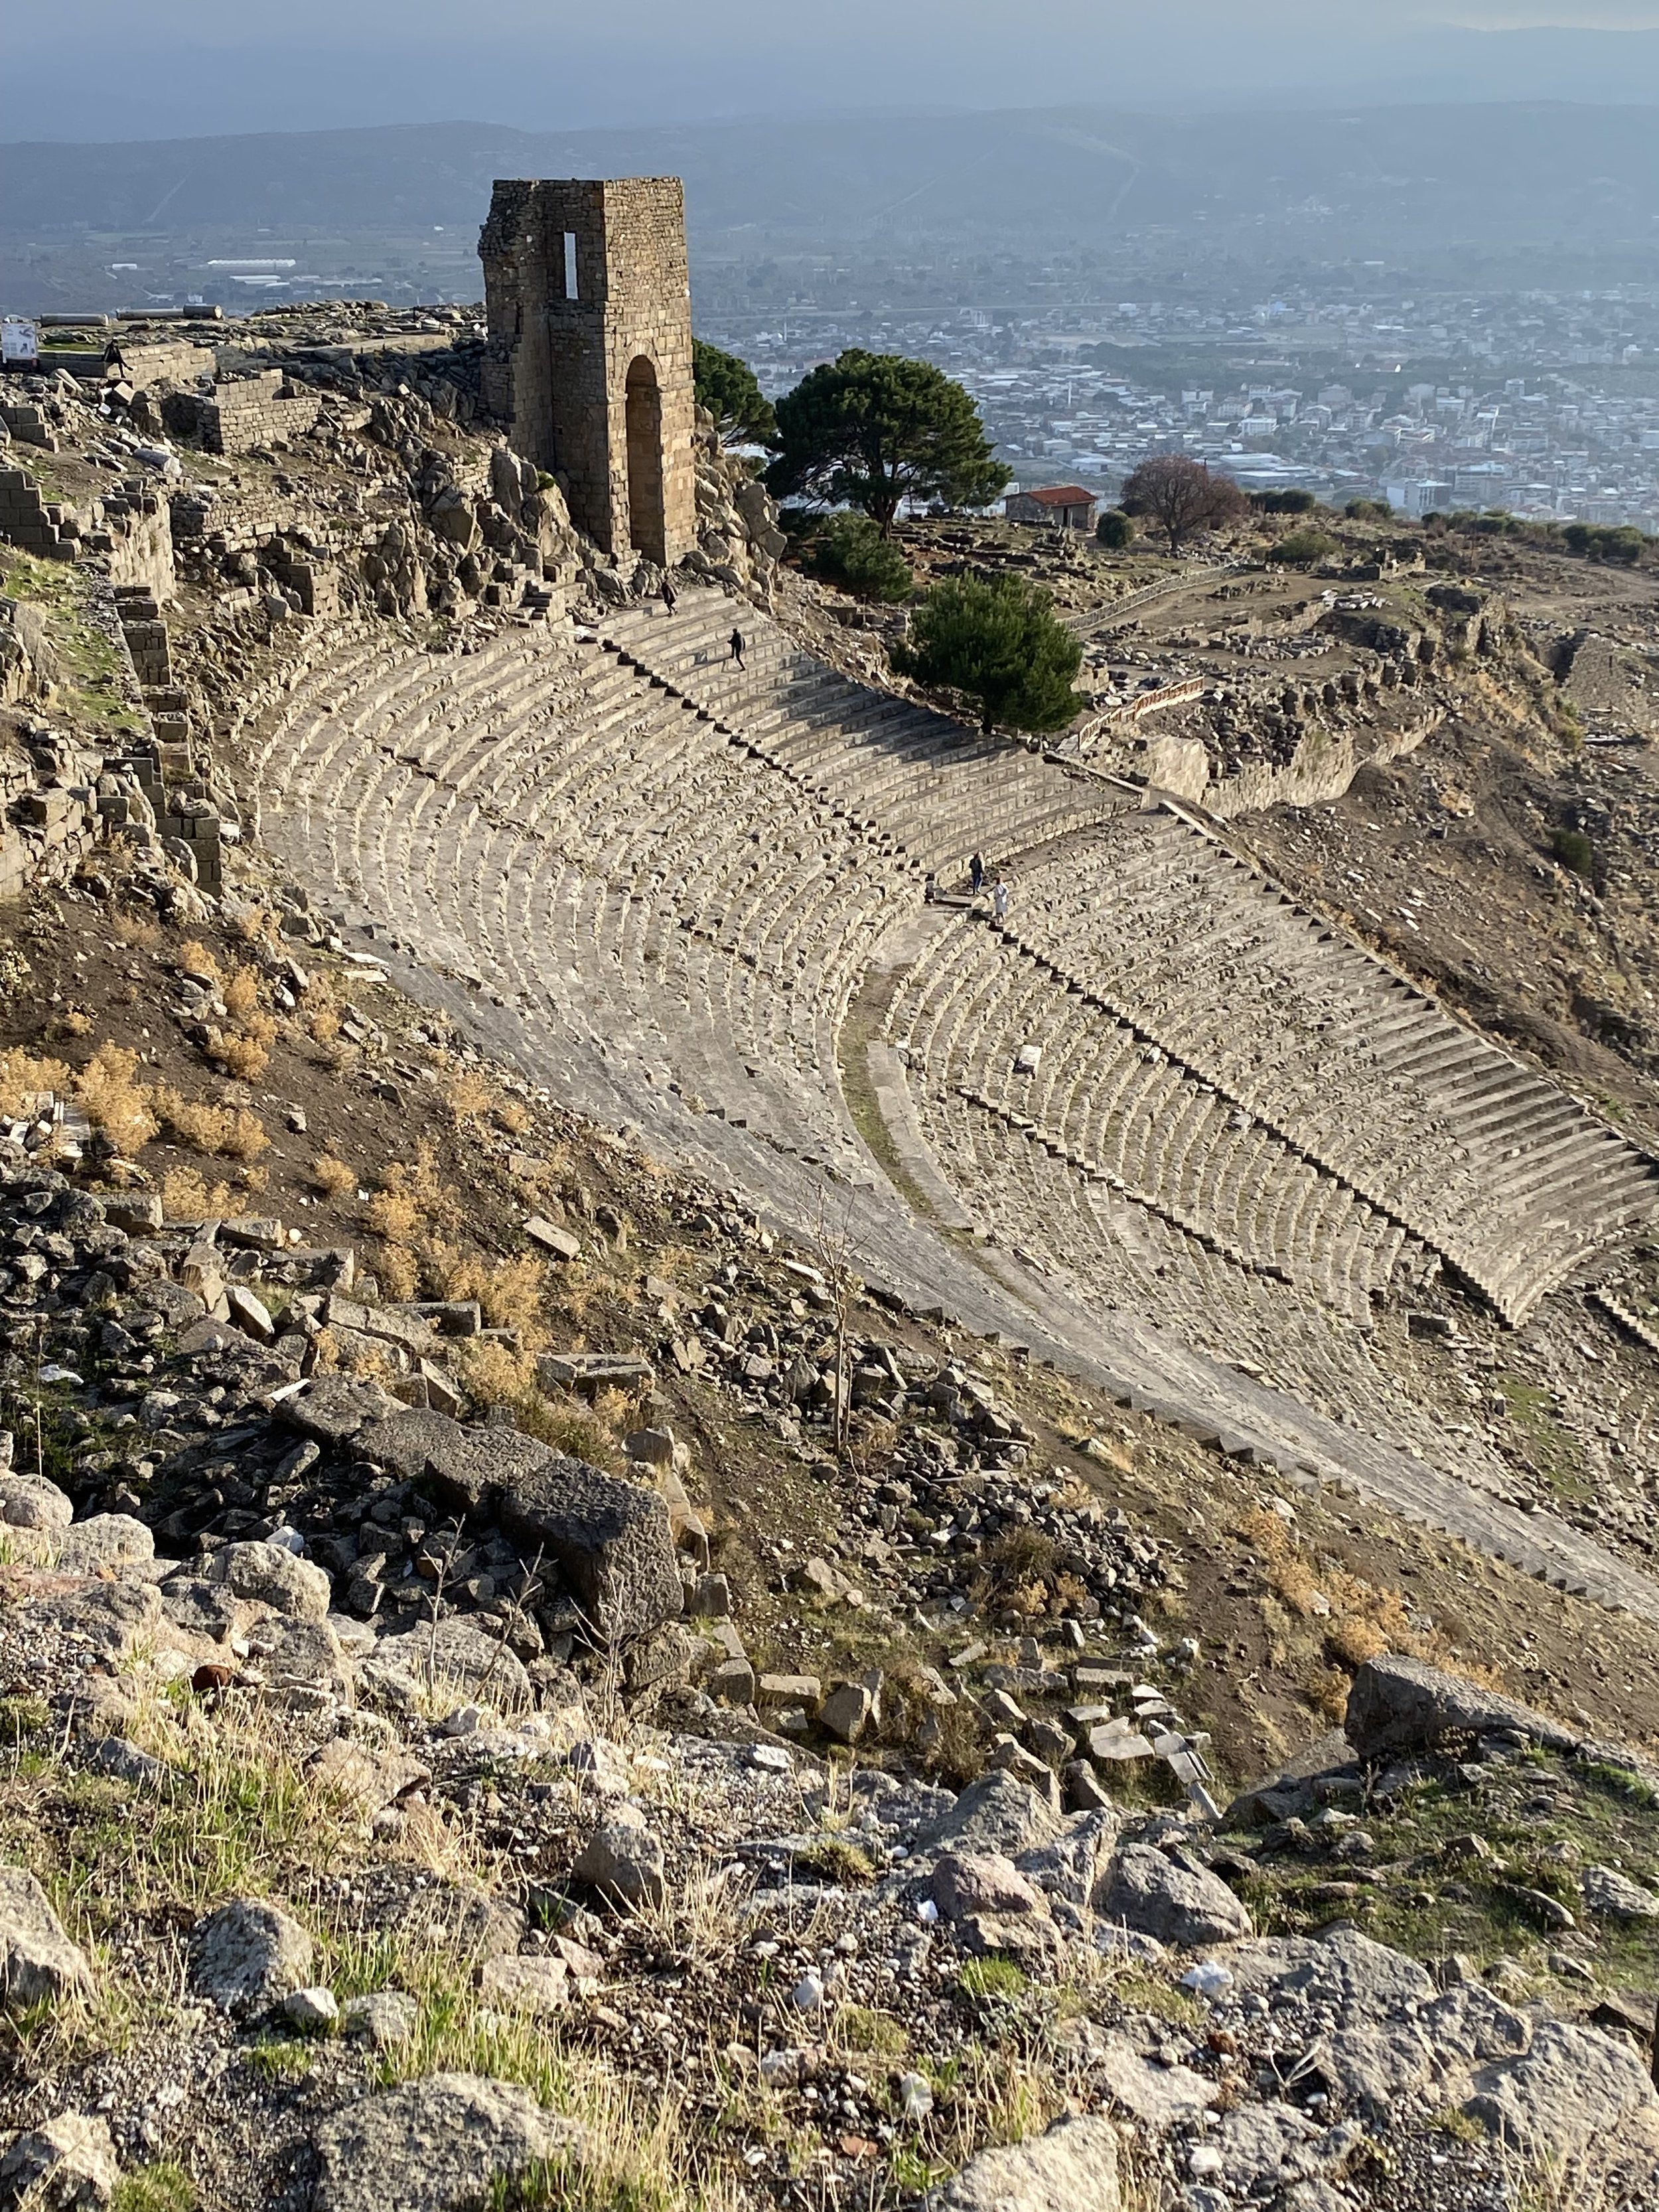 The Pergamum theater, the steepest theater in ancient times.